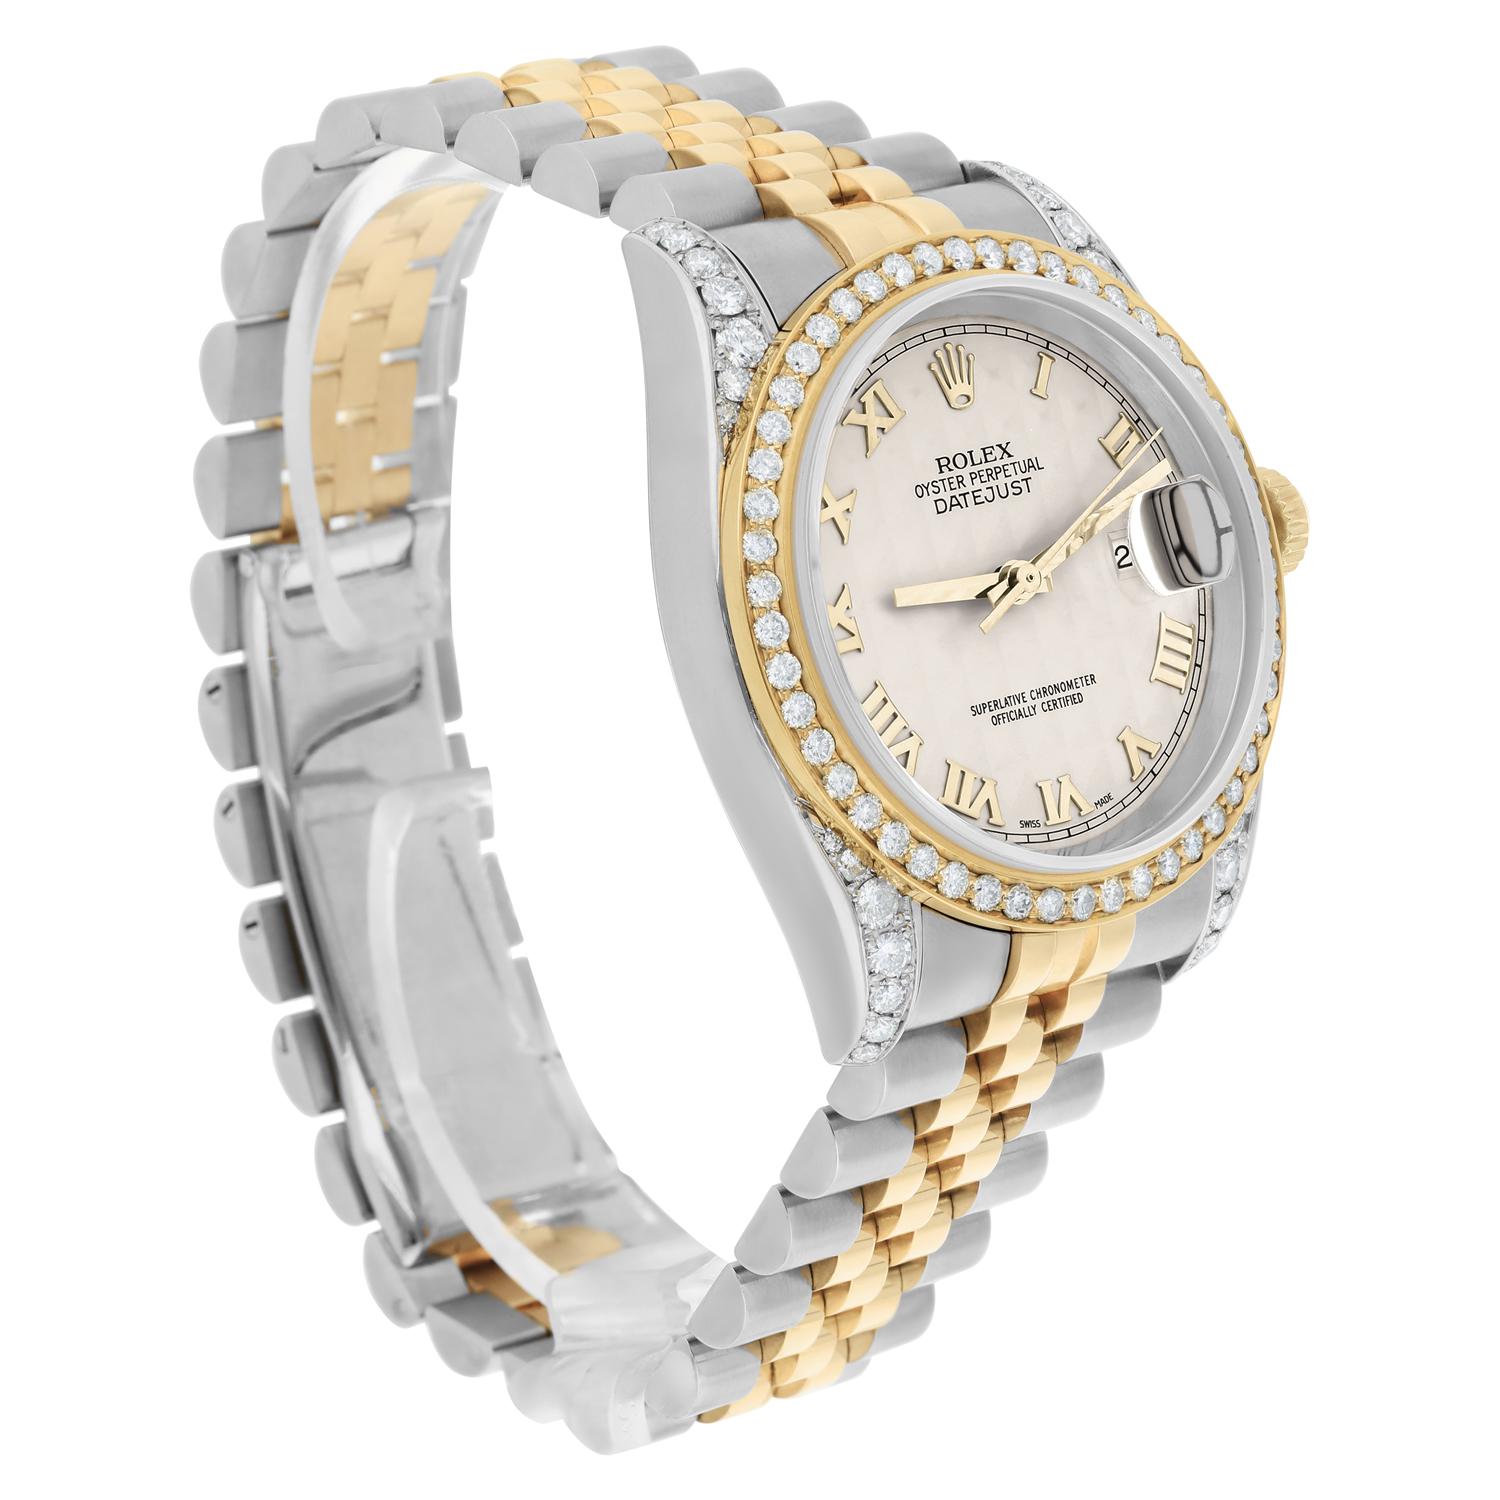 Rolex Datejust 36 Diamond Gold and Steel 116233 Ivory Pyramid Dial Jubilee Watch For Sale 1